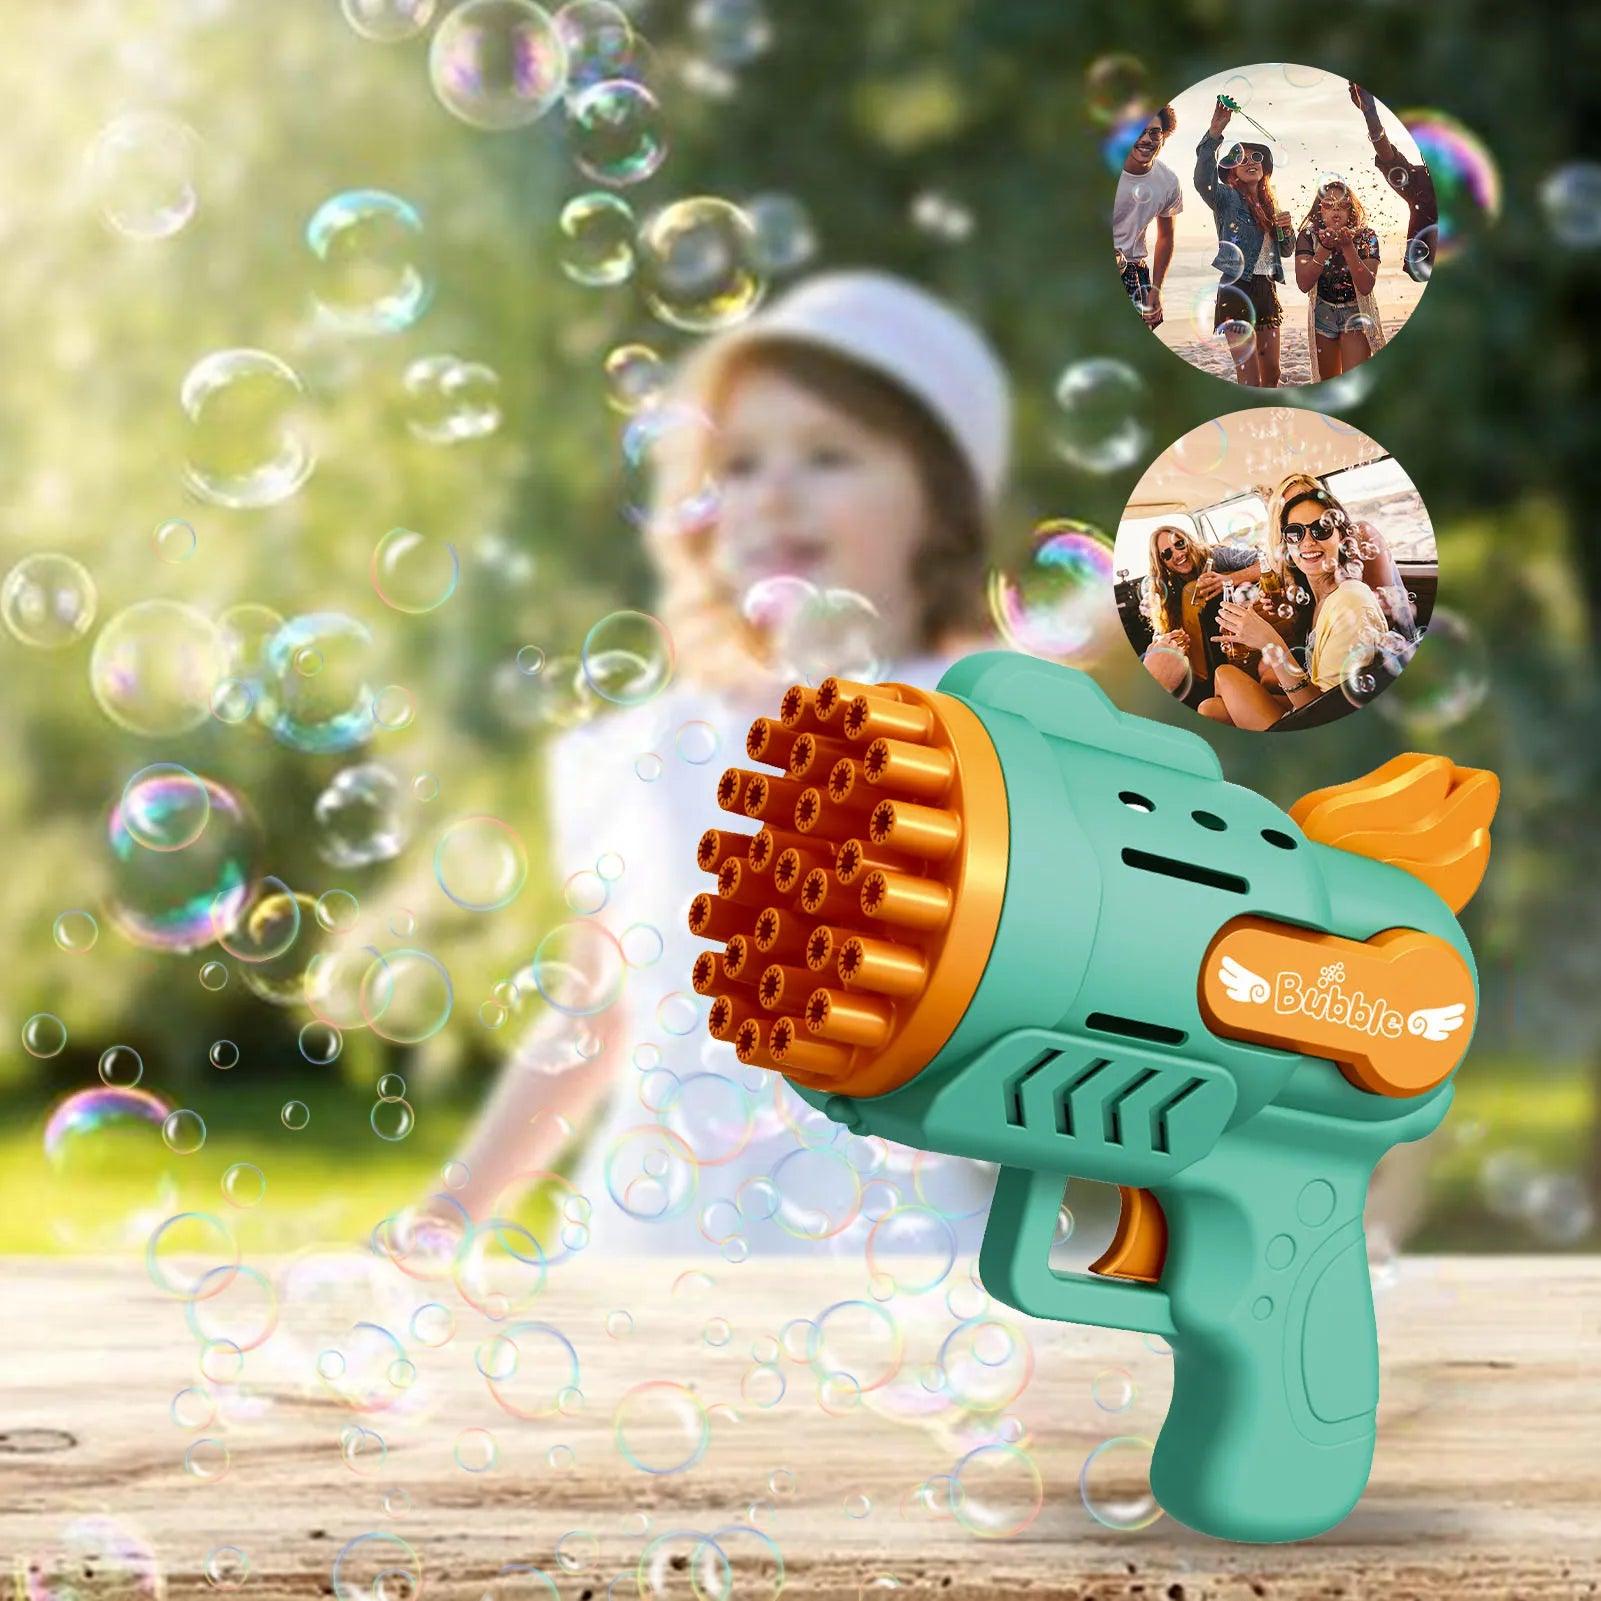 Bubble Blaster Kids Bubble Machine Toy with LED Lights - Fun Outdoor Indoor Toy for Children's Birthdays, Weddings, and Parties  ourlum.com   